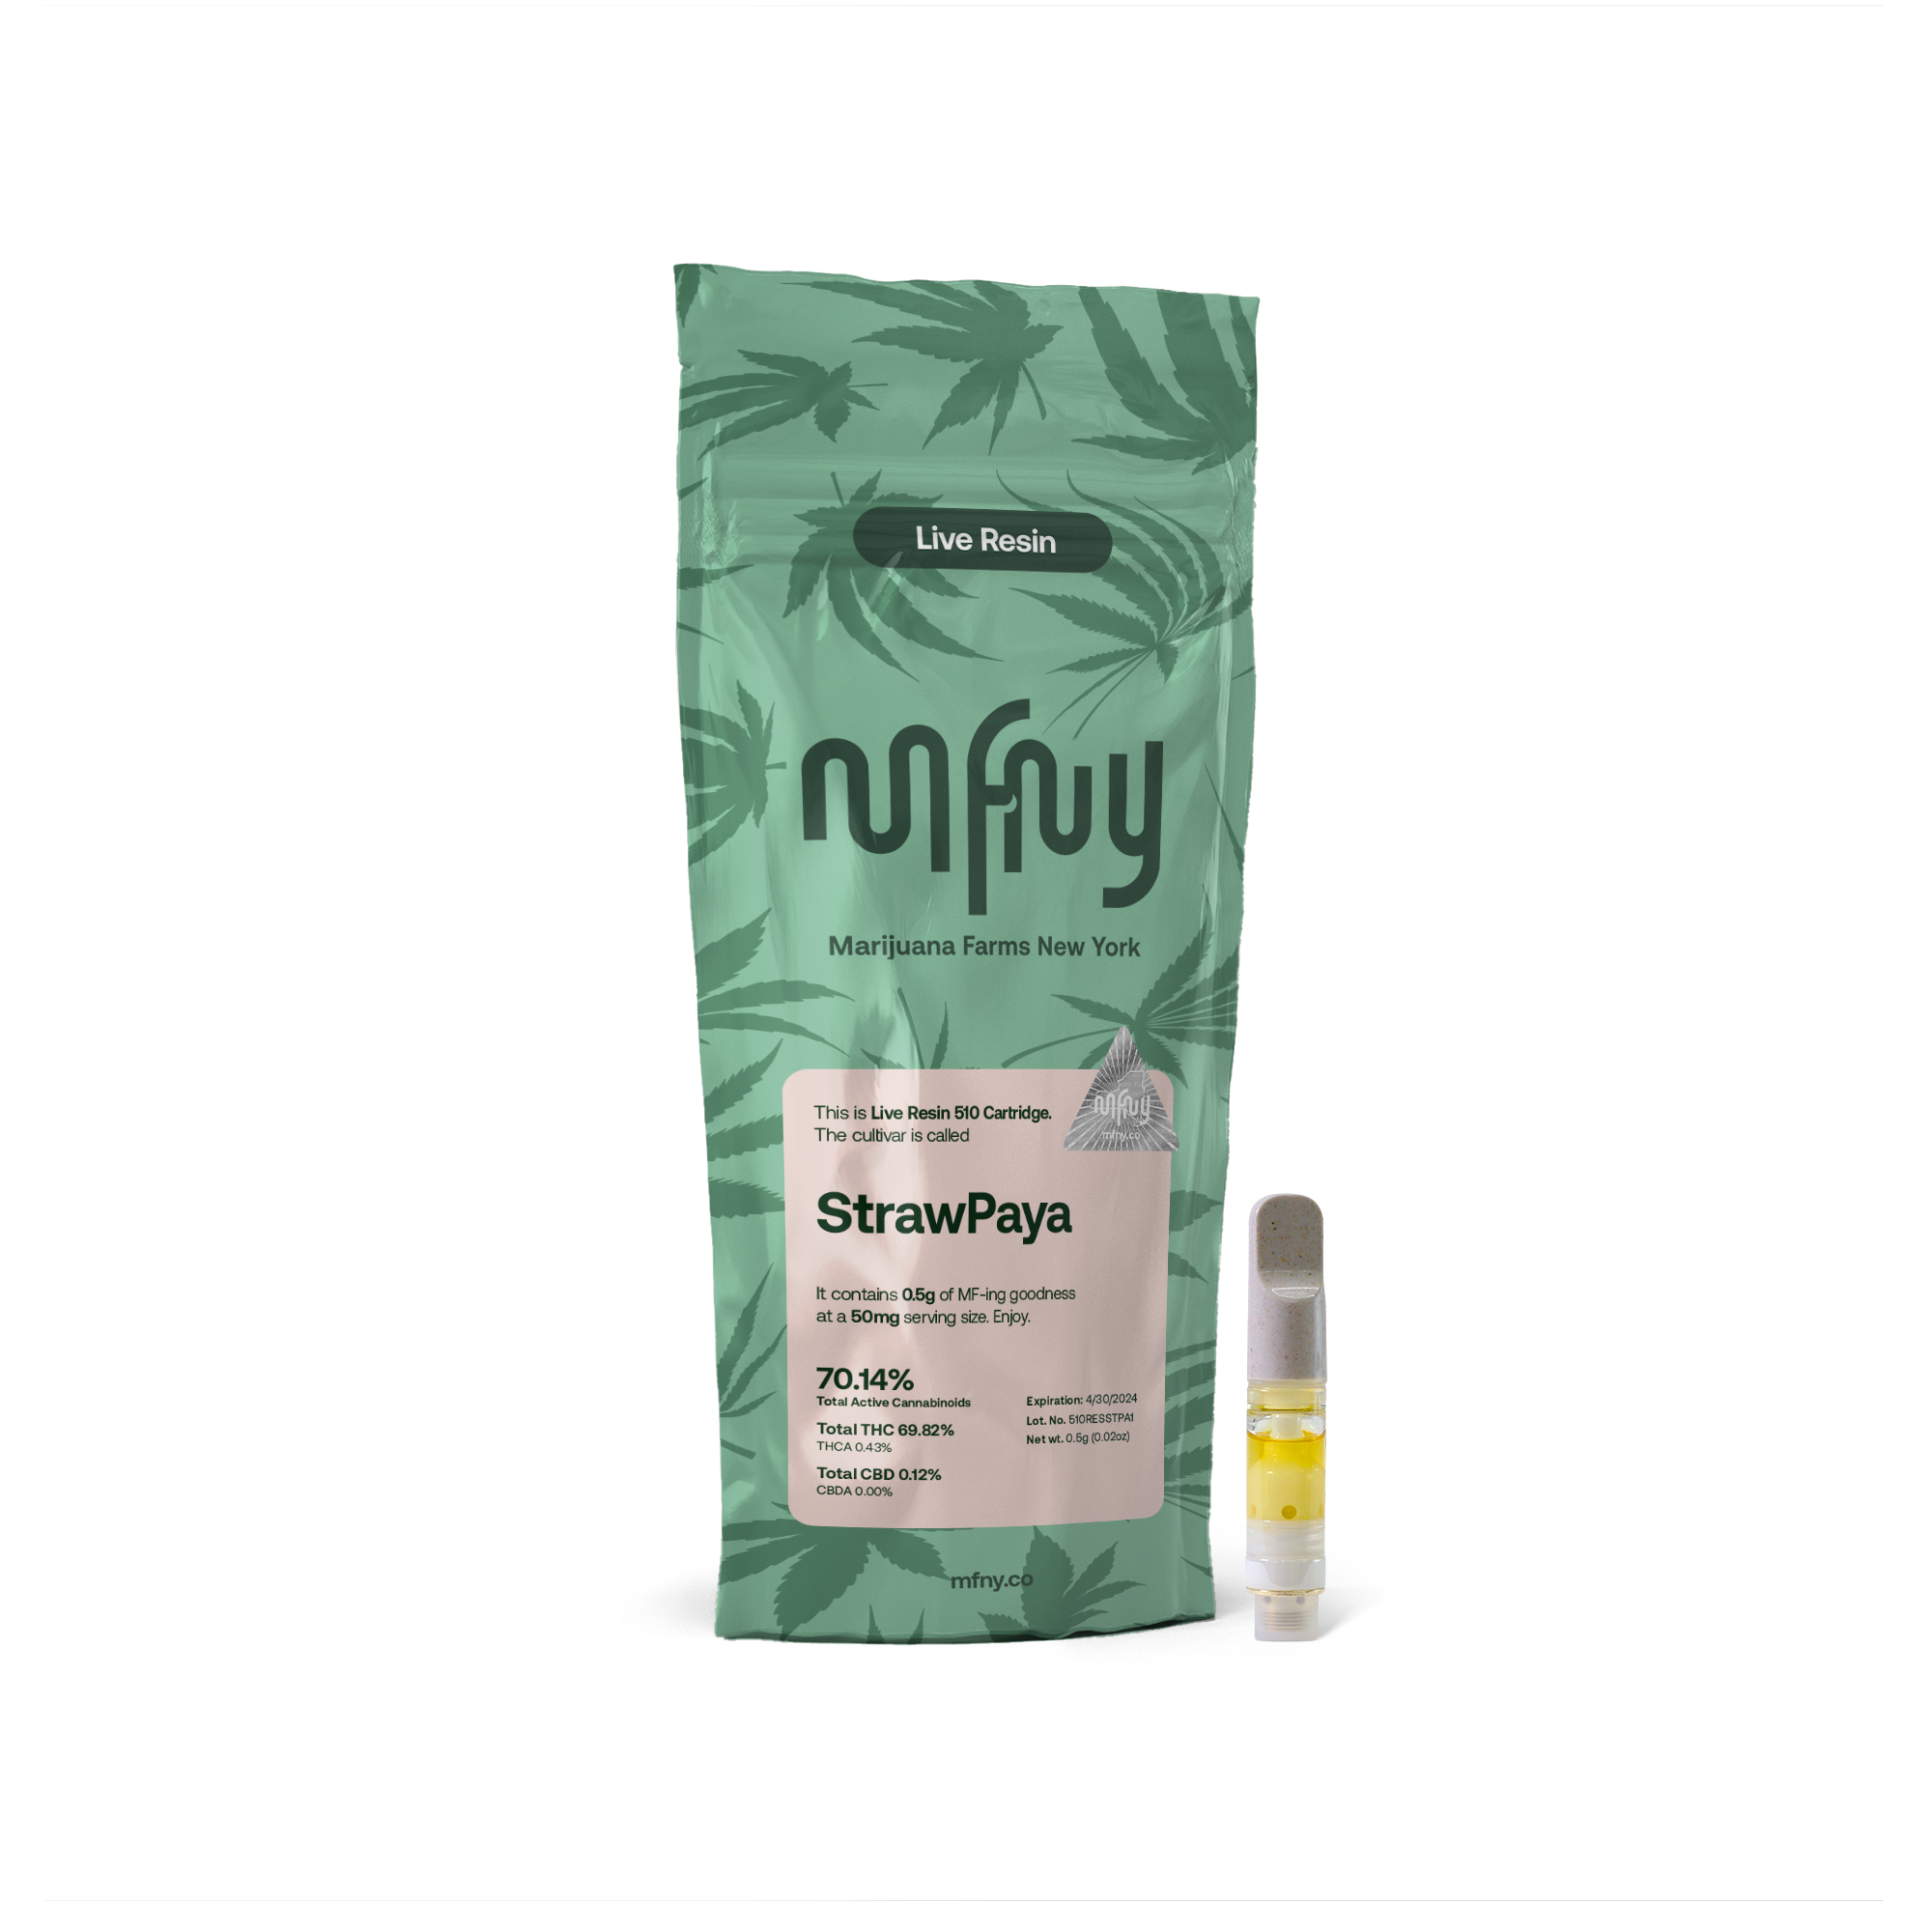 StrawPaya Live Resin • Cartridge • .5g - MFNY - VAPORIZERS - Rockland County Weed Delivery | Treehouse Cannabis